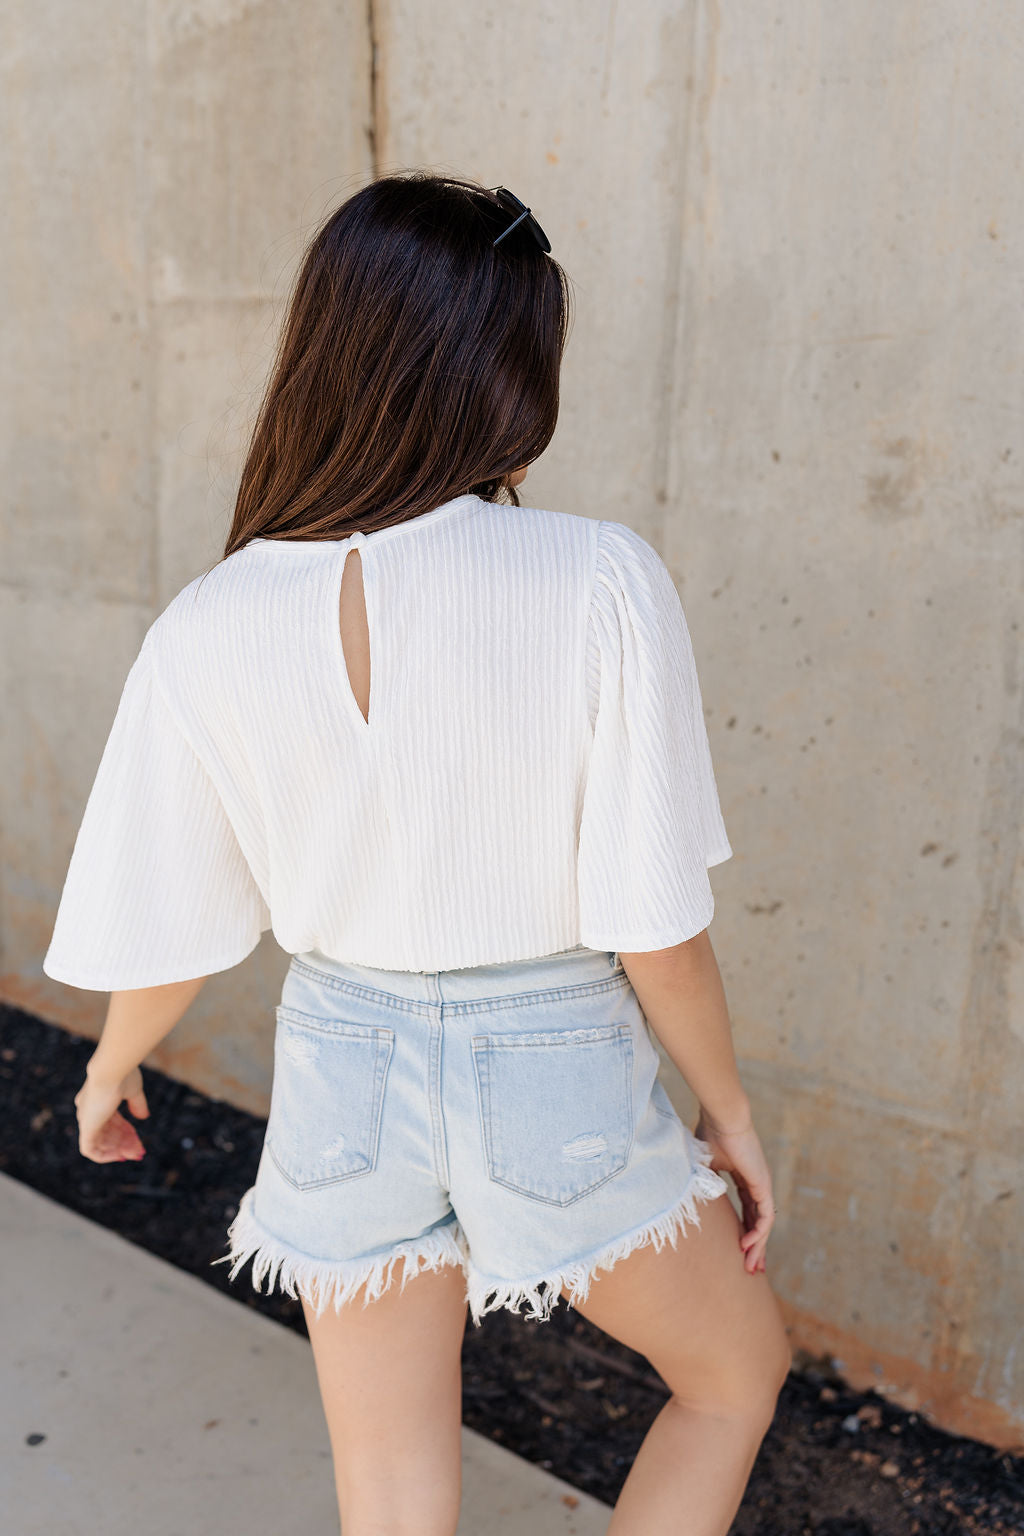 Back view of model wearing the Merritt Ivory Short Sleeve Top which features ivory textured fabric, round neckline, short sleeves and back key hole with monochrome button closure.